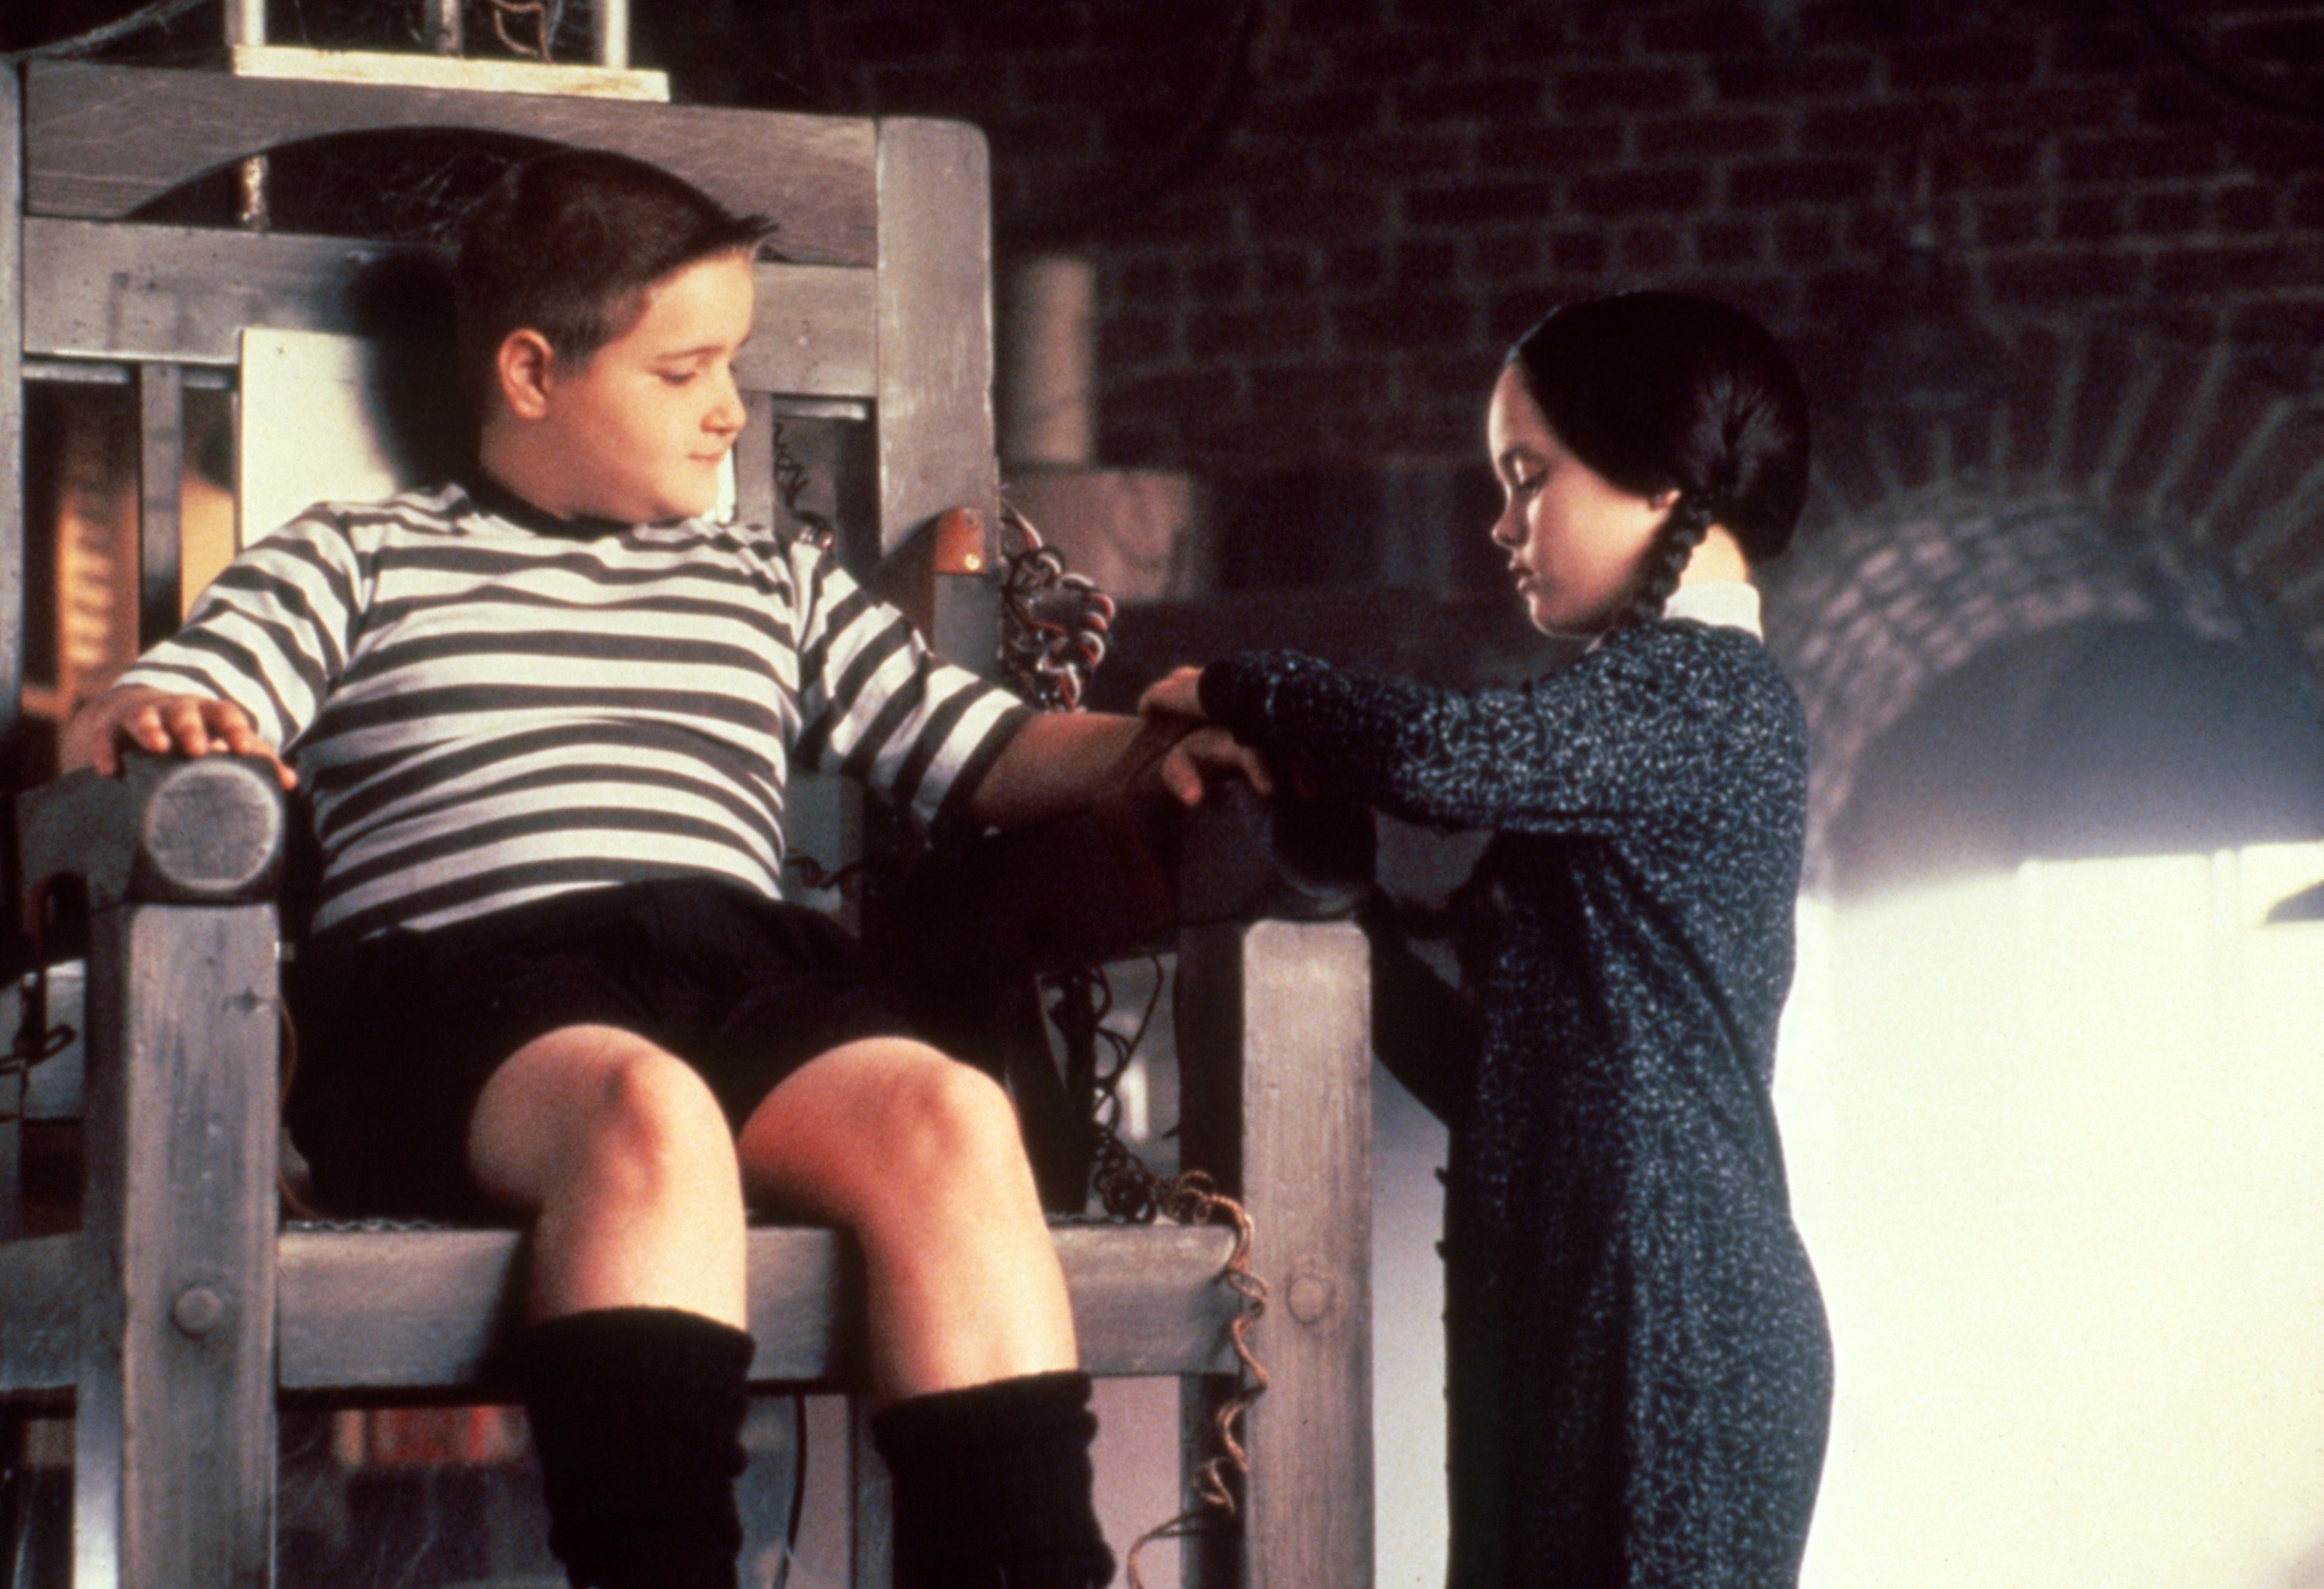 Jimmy Workman sitting in a chair while Christina Ricci ties his arm.